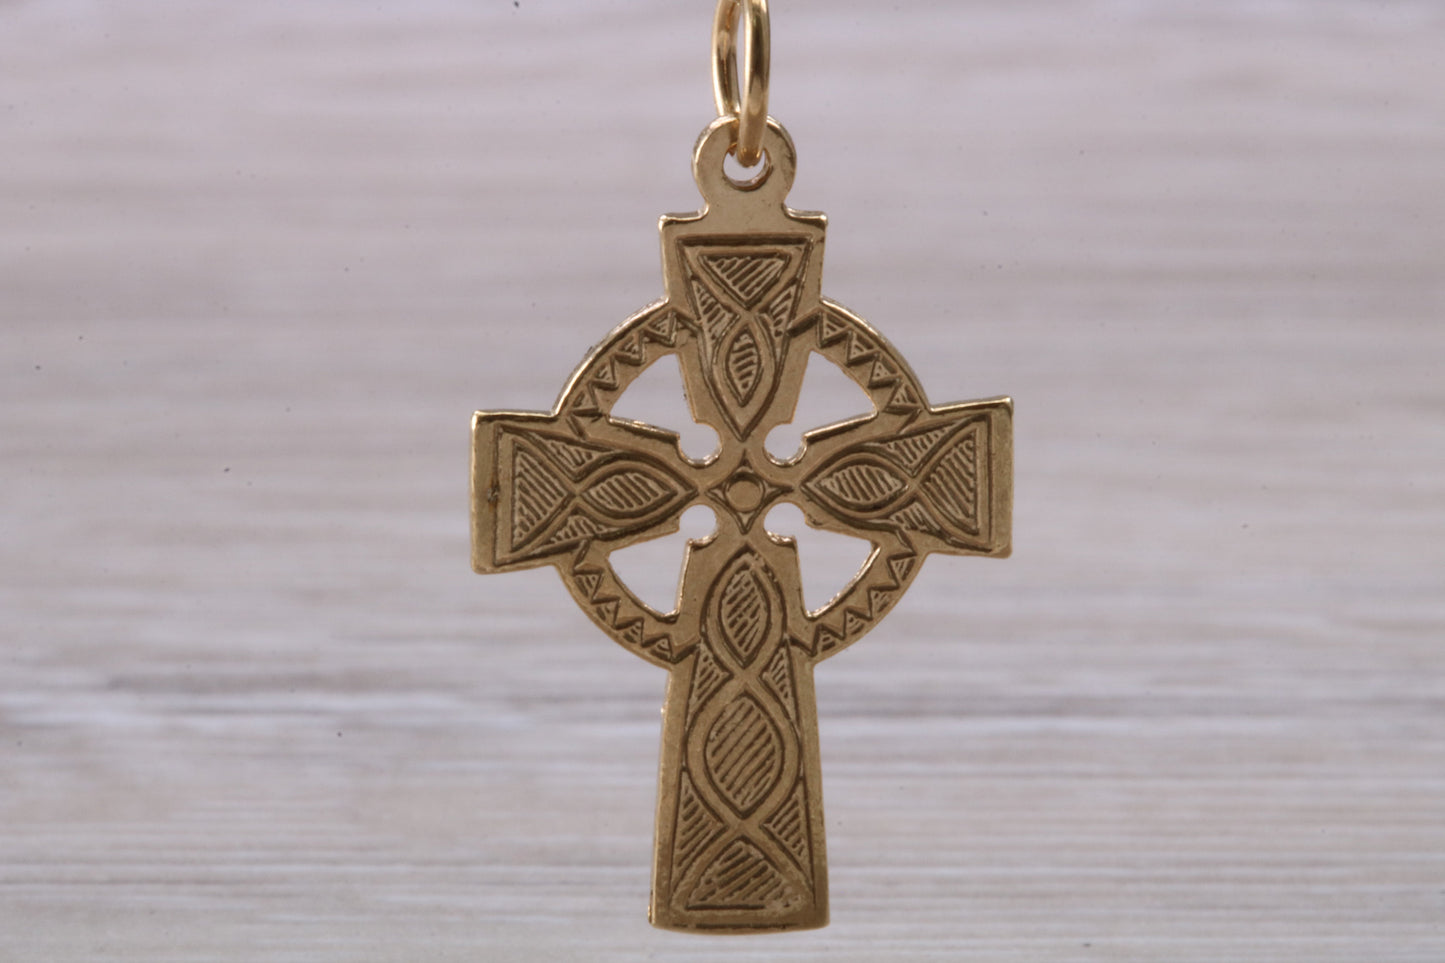 9ct Yellow Gold Cross Necklace